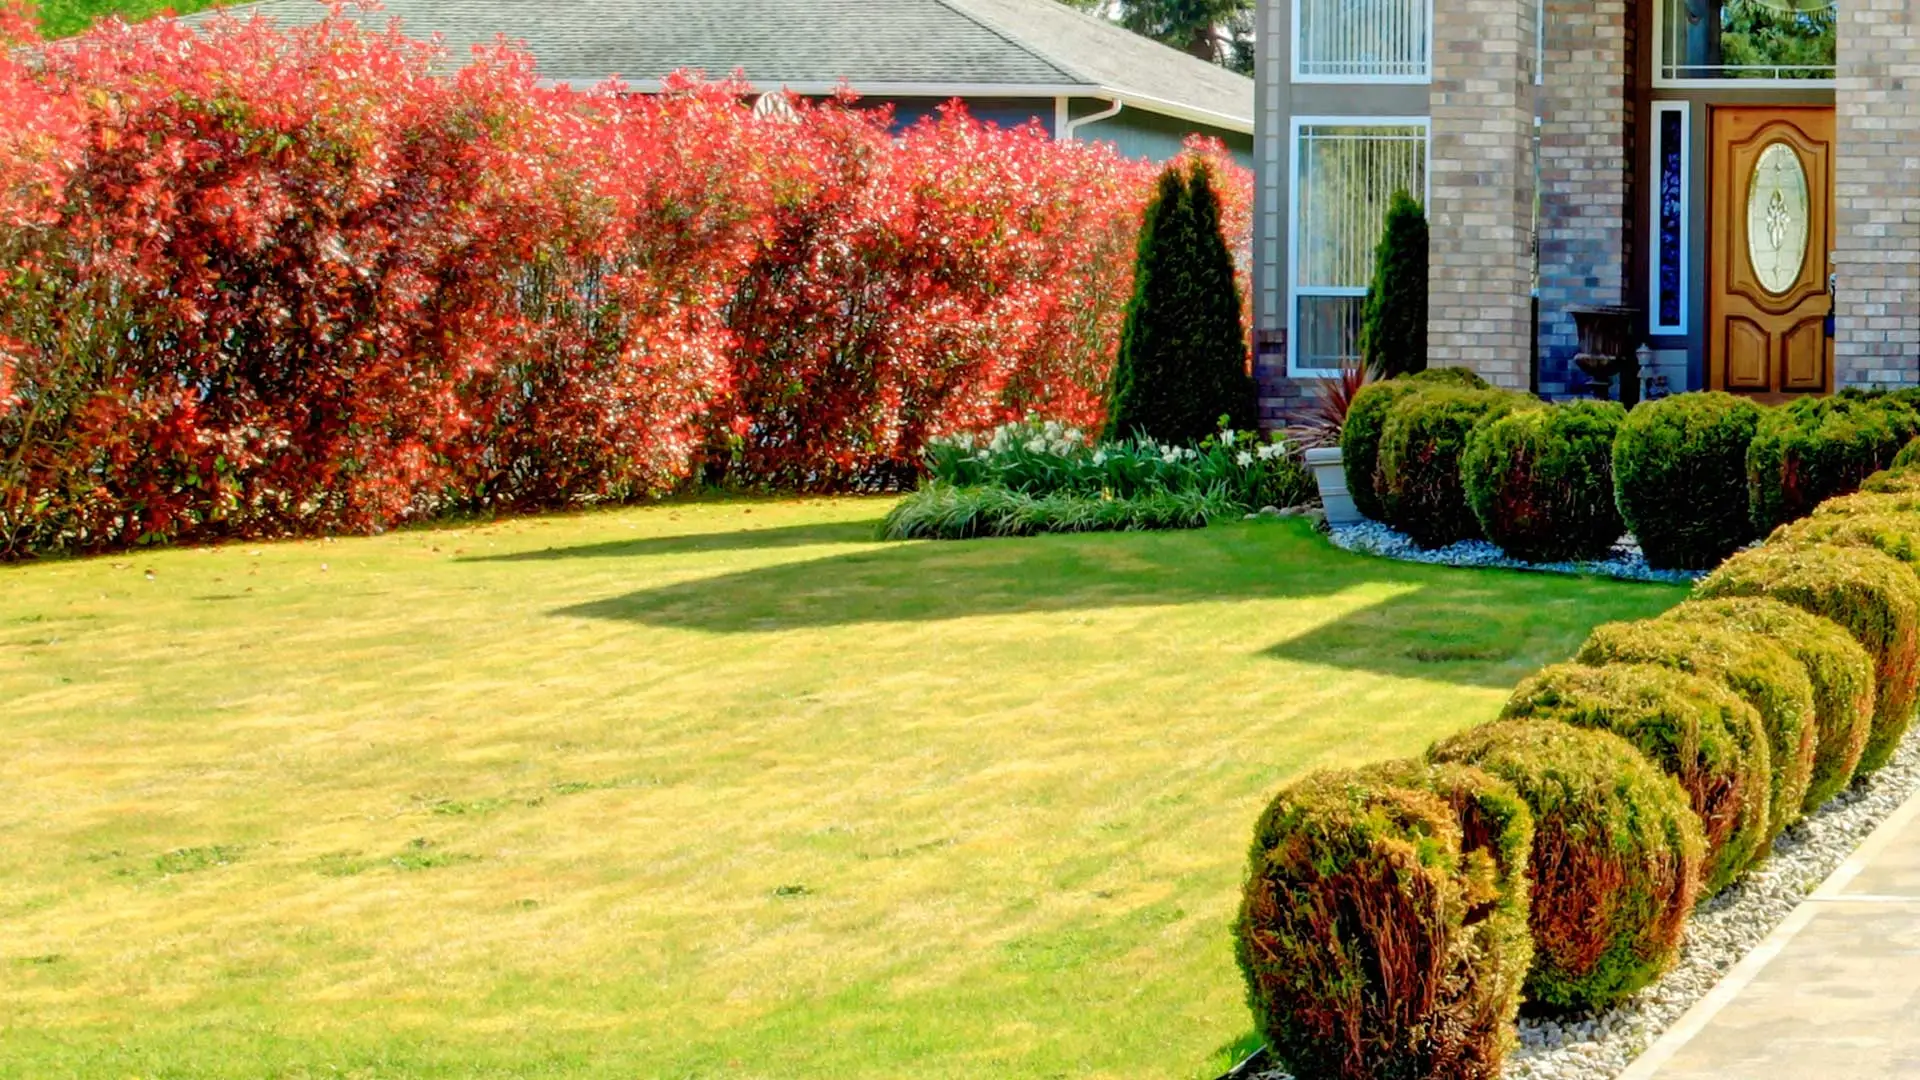 Start a career in lawn care maintenance with J&C Lawn Care in Gresham, OR.